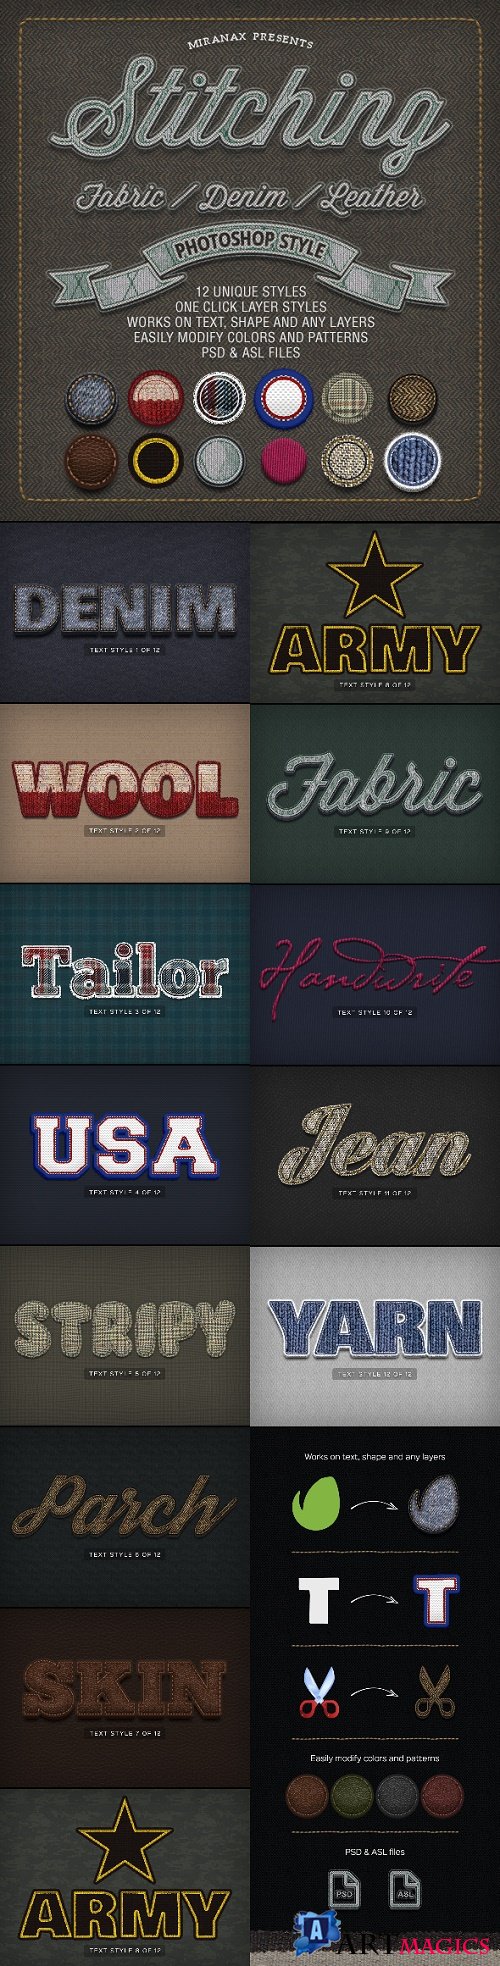 Stitching Fabric - Denim - Leather Text Effects - 8230591